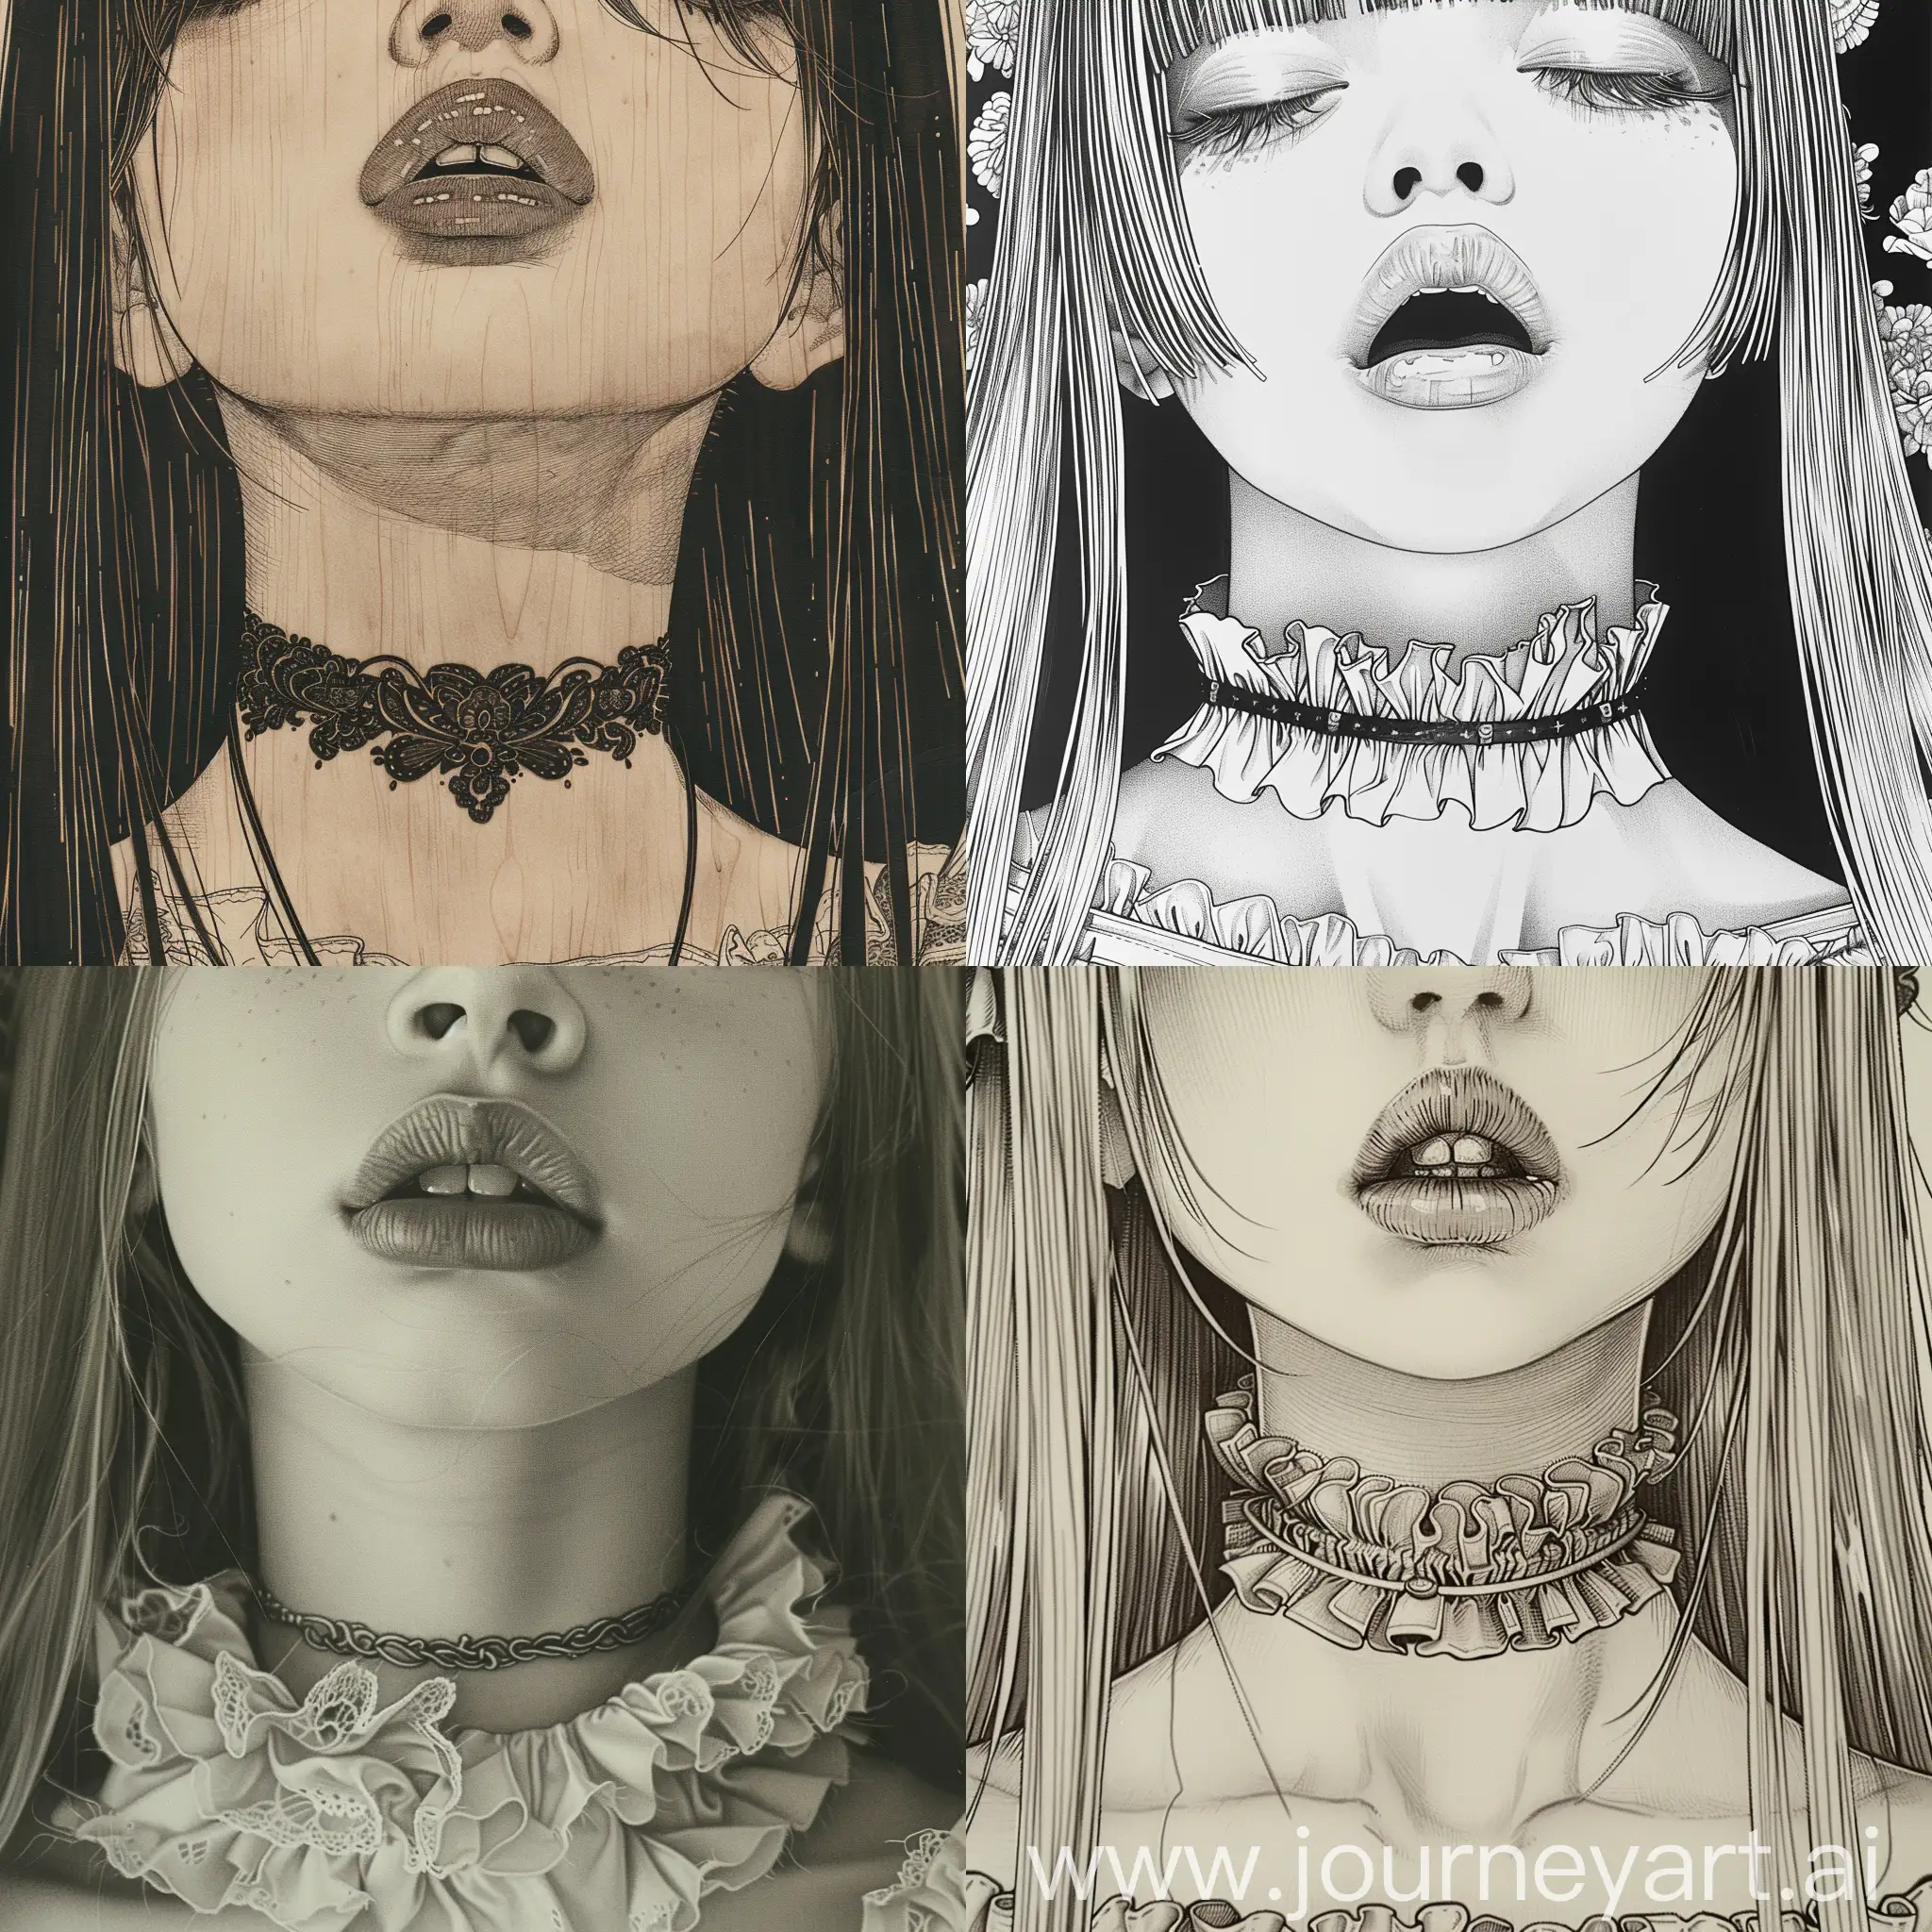 Innocent-Tween-with-Intricate-Details-and-Frilly-Choker-in-Photorealistic-Woodcut-Style